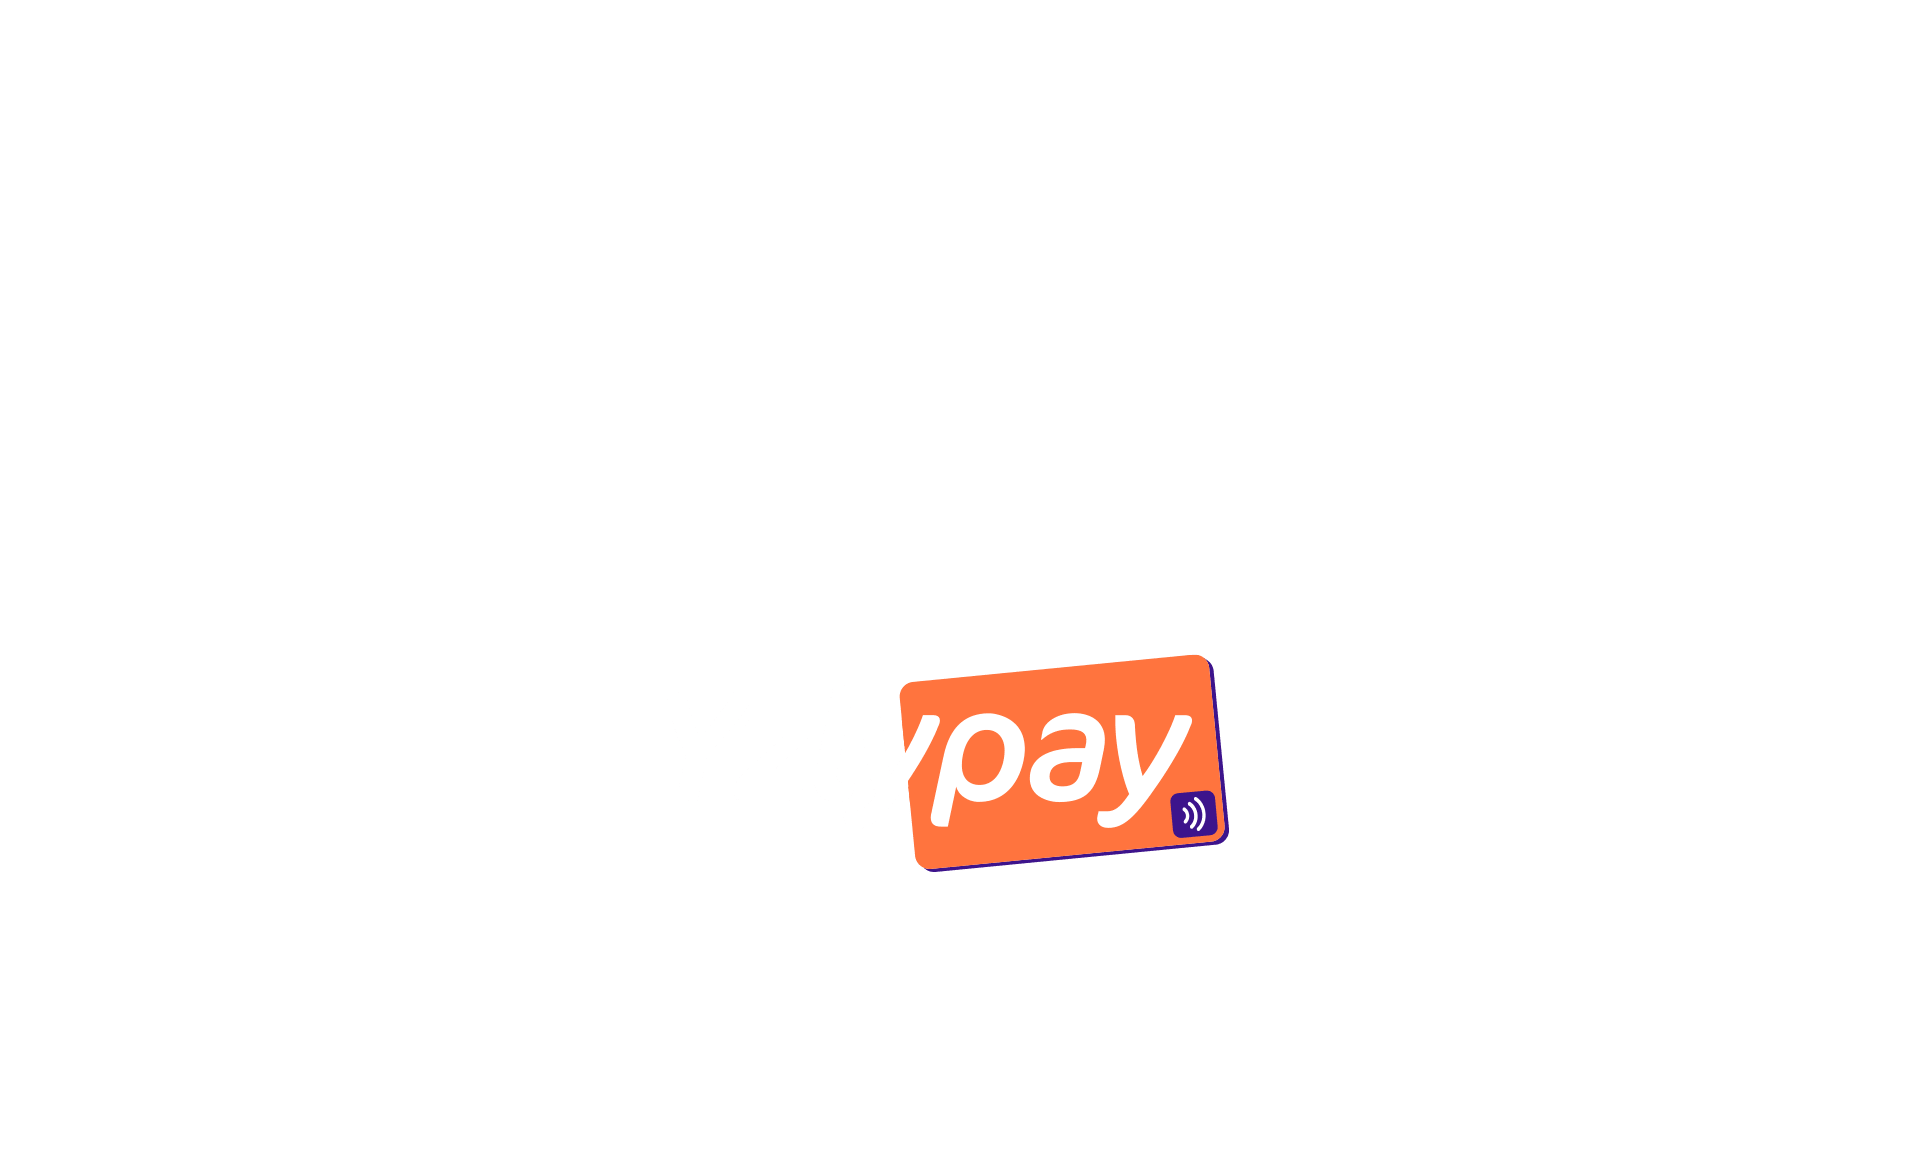 benefits yzlypay we reward your dedication yzly pay optimized payment solutions parallax